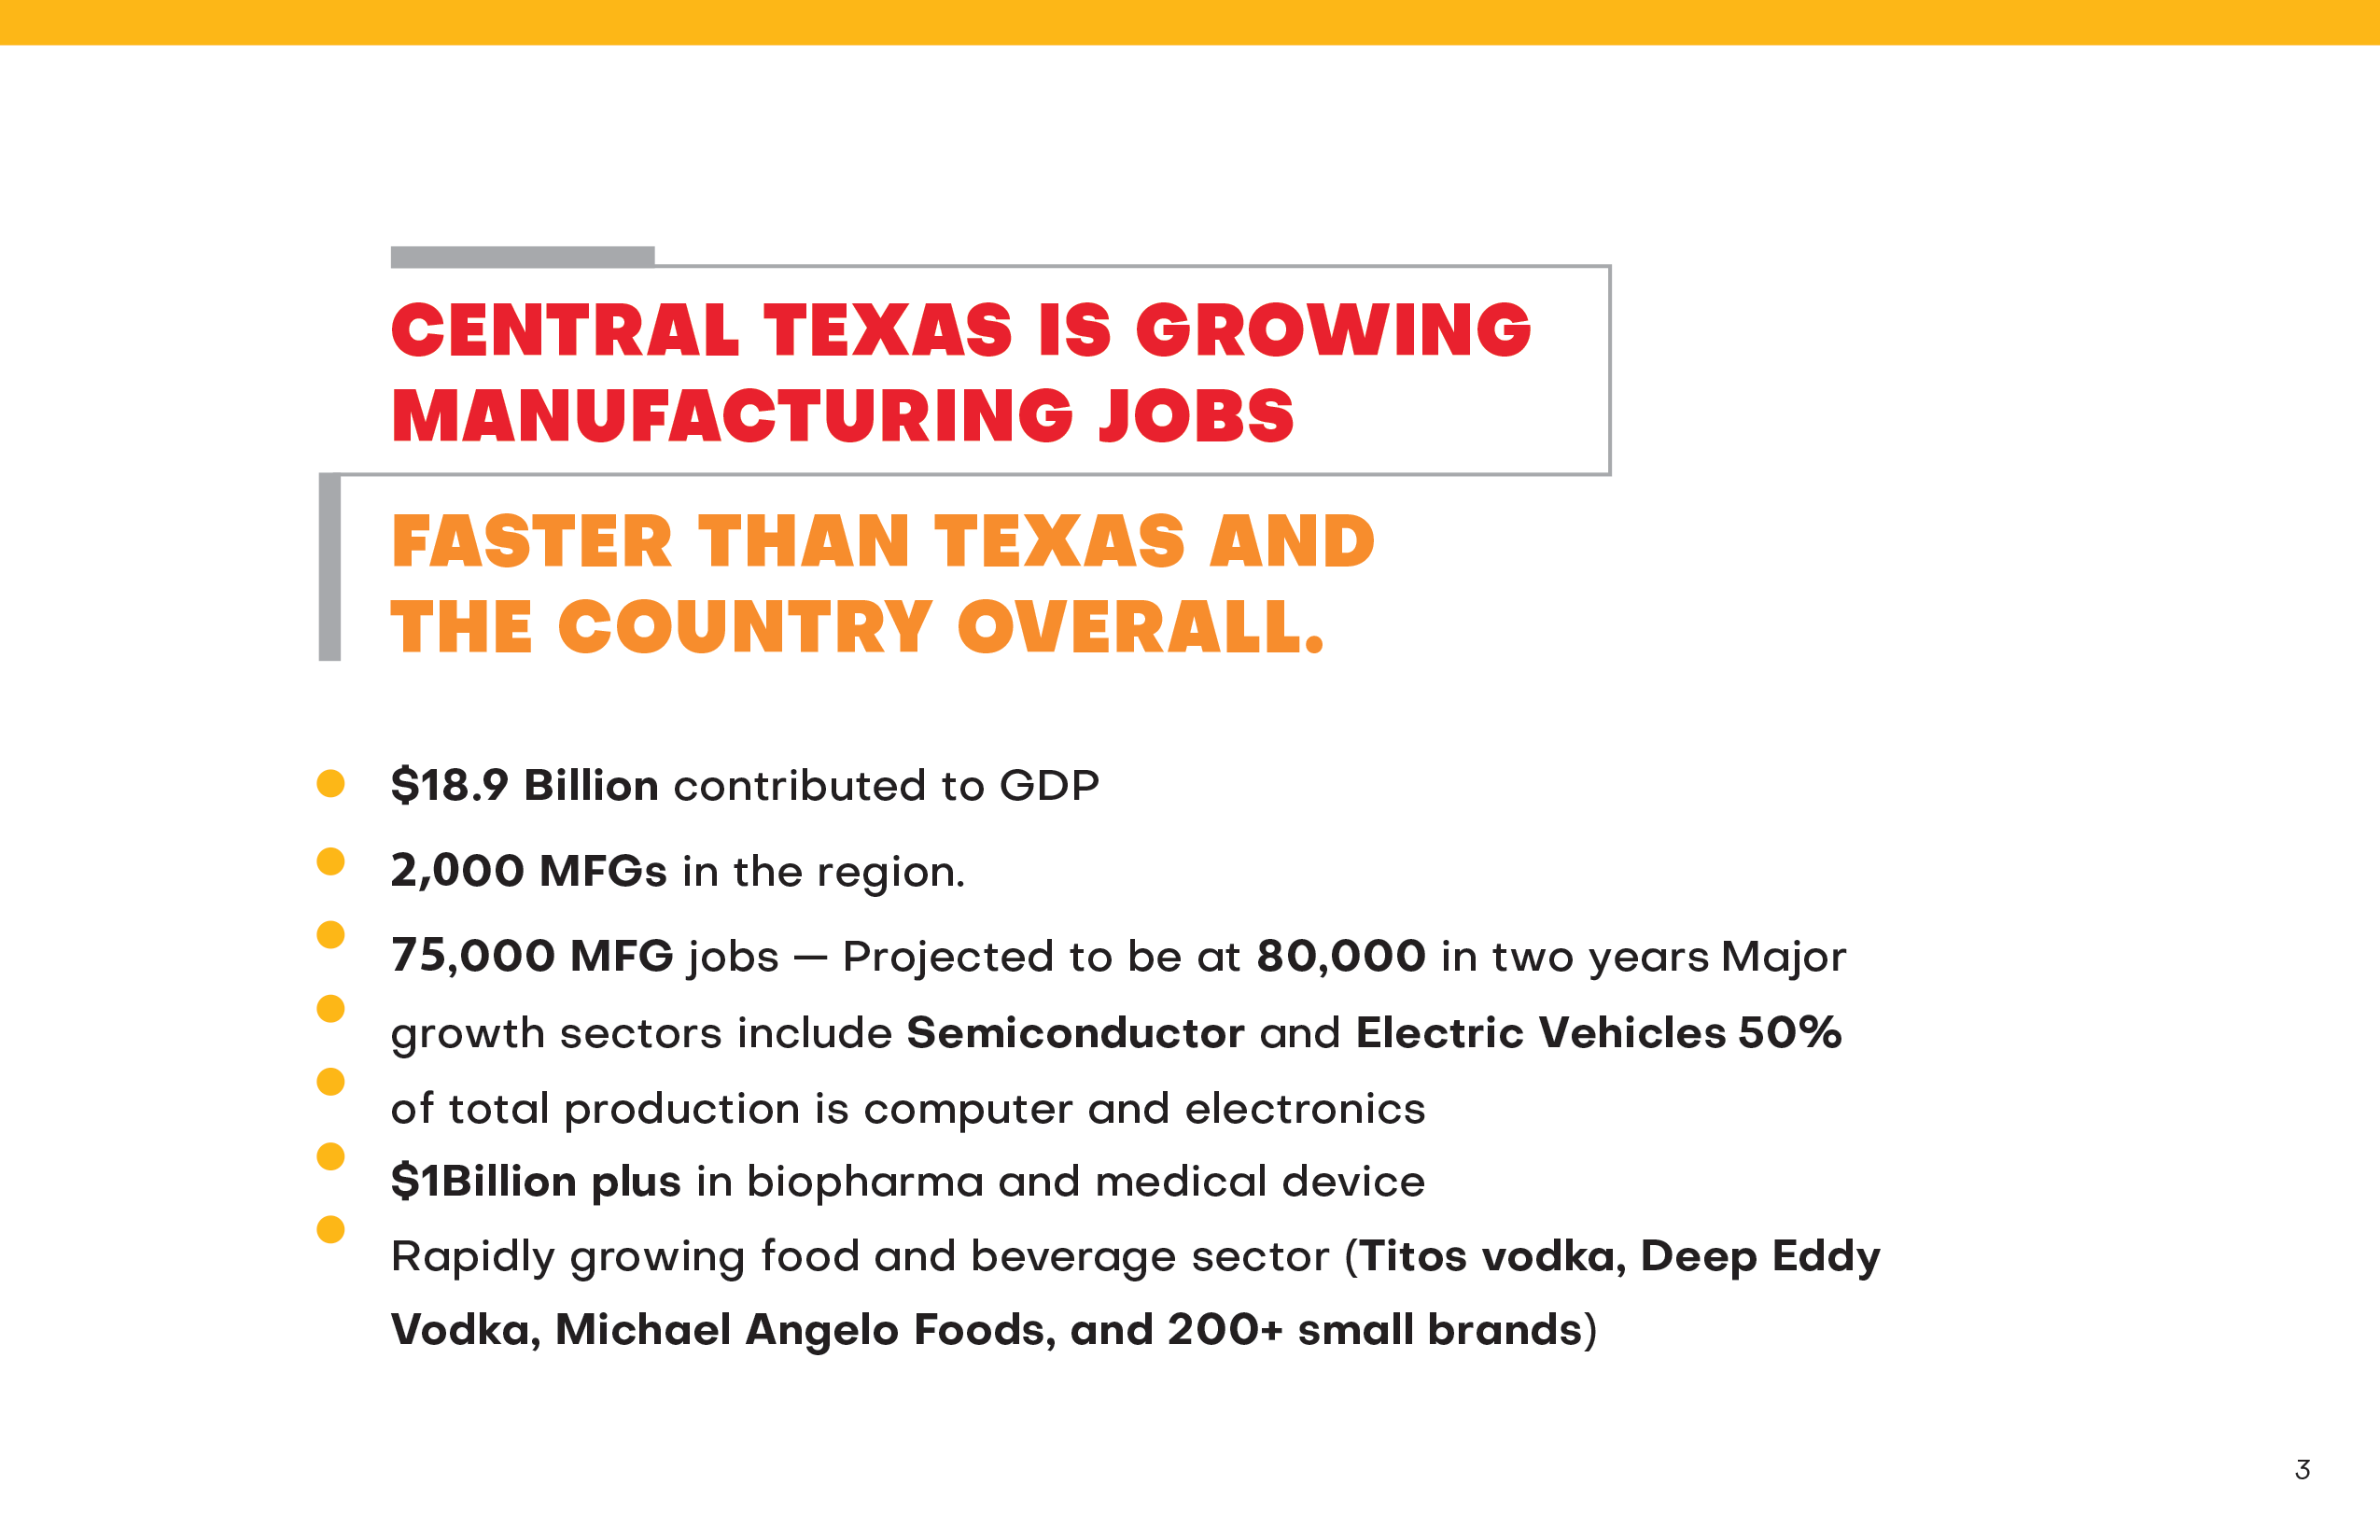 Central Texas is Growing Manufacturing Jobs